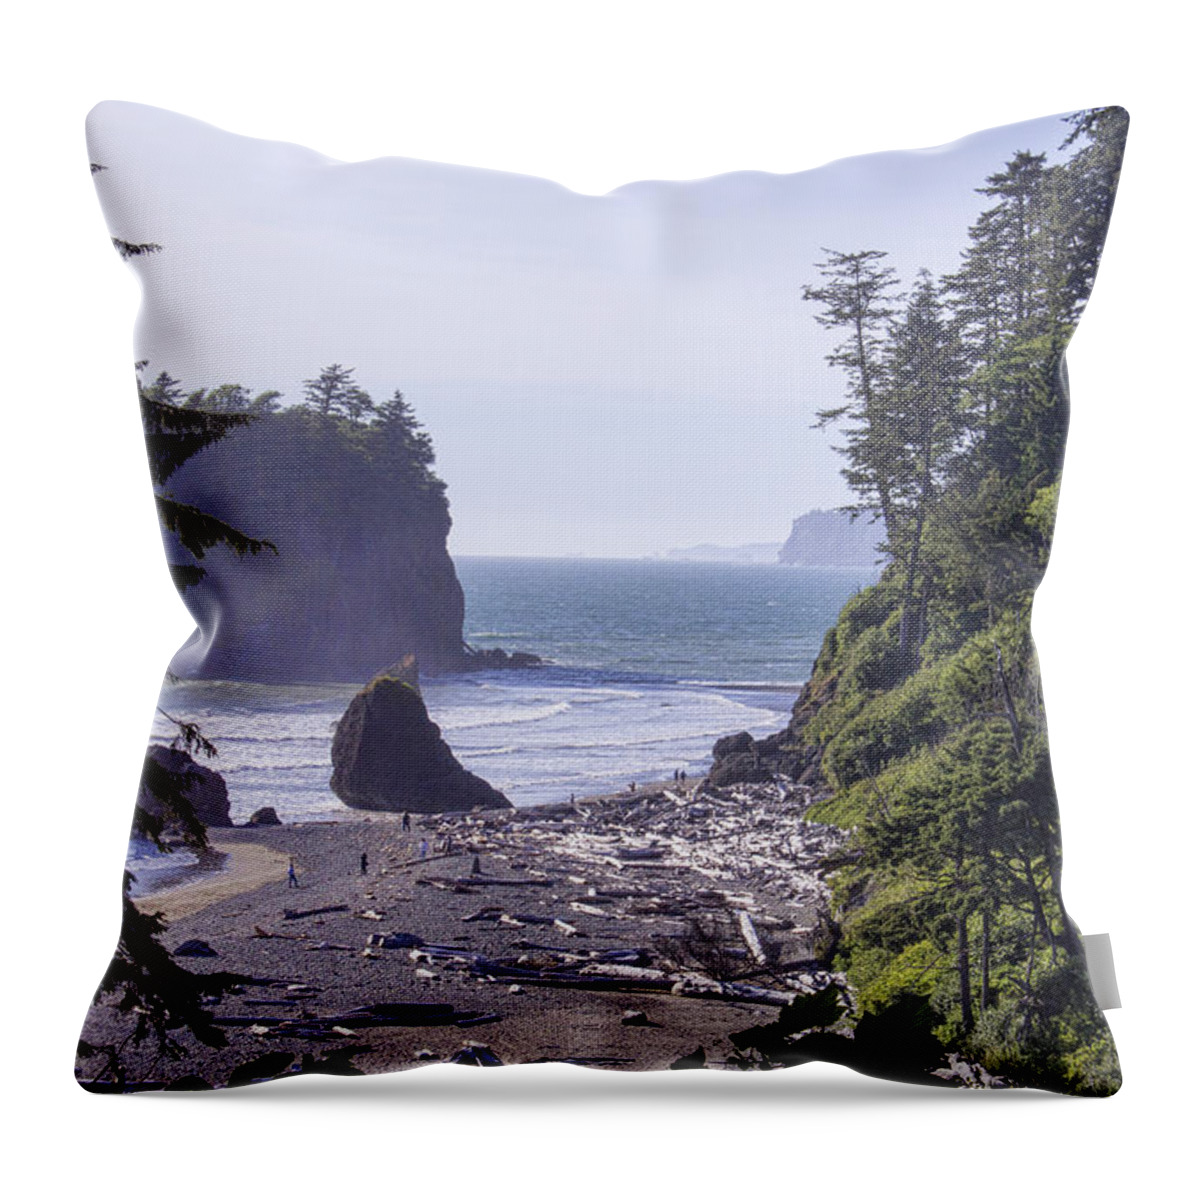  Beach Throw Pillow featuring the photograph Ruby Beach by Cathy Anderson